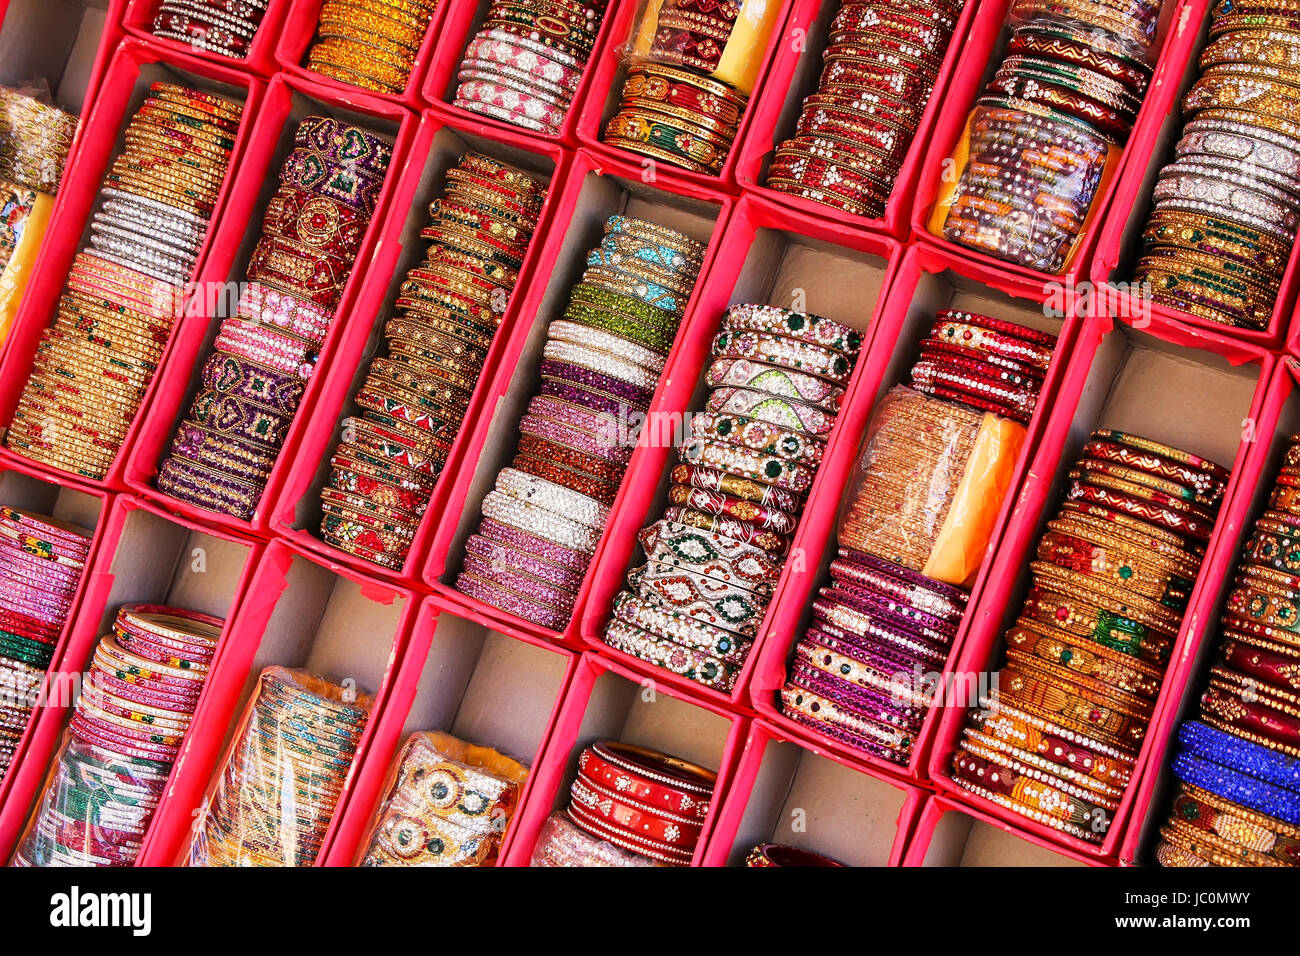 Display of colorful bangels inside City Palace in Jaipur, Rajasthan, India. Stock Photo